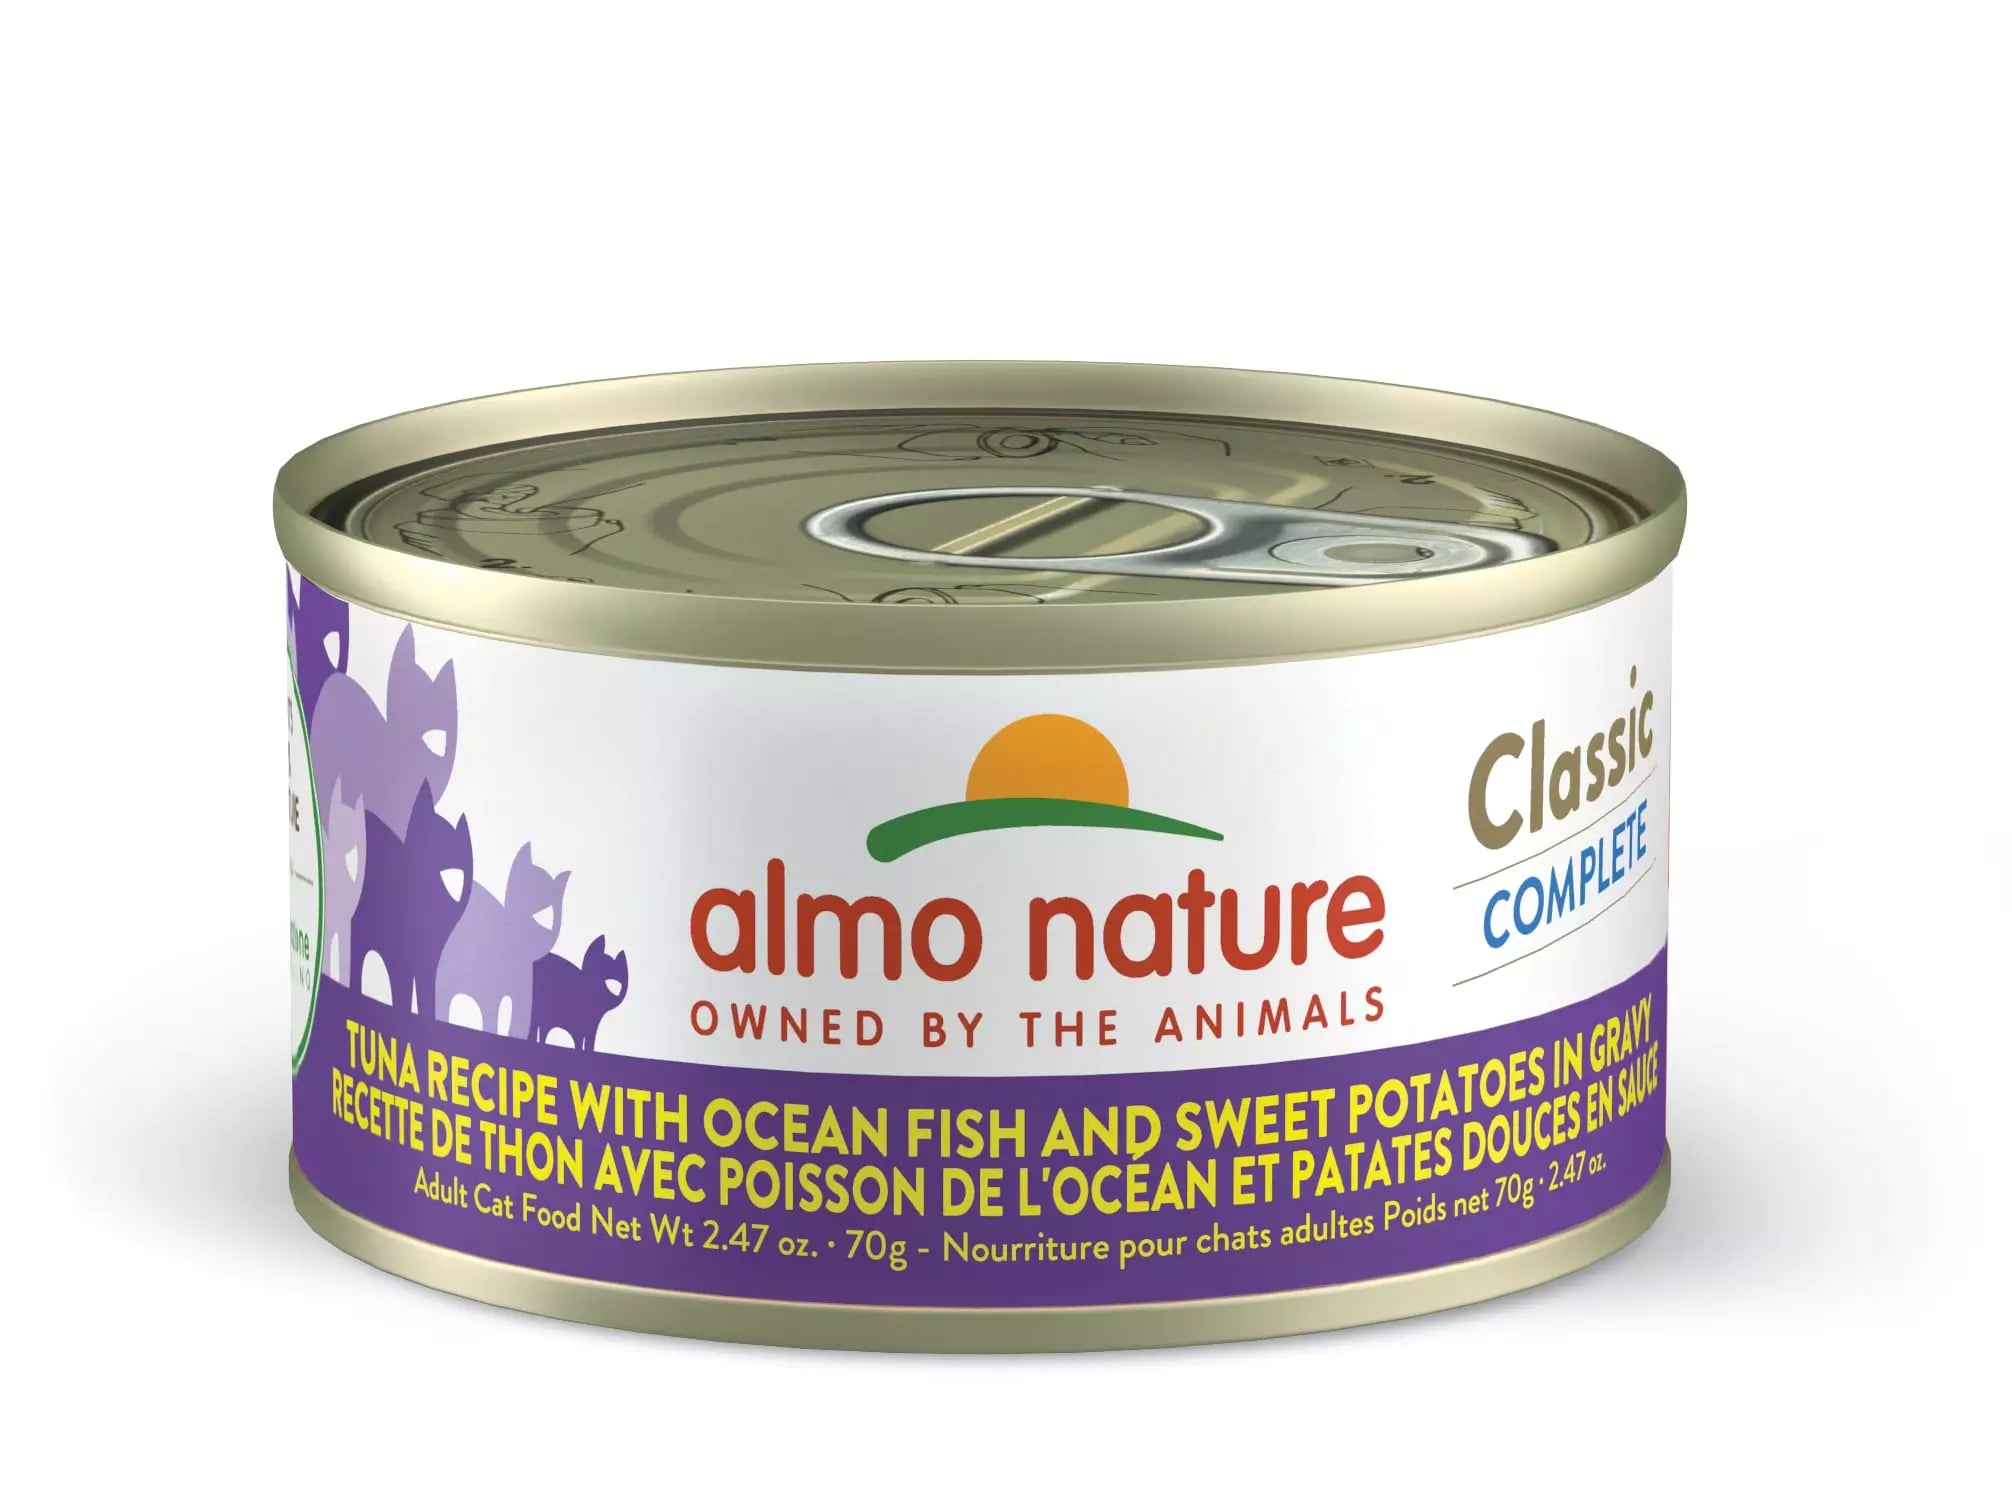 Almo Nature - Classic Complete - Tuna With Fish in Gravy (Wet Cat Food)